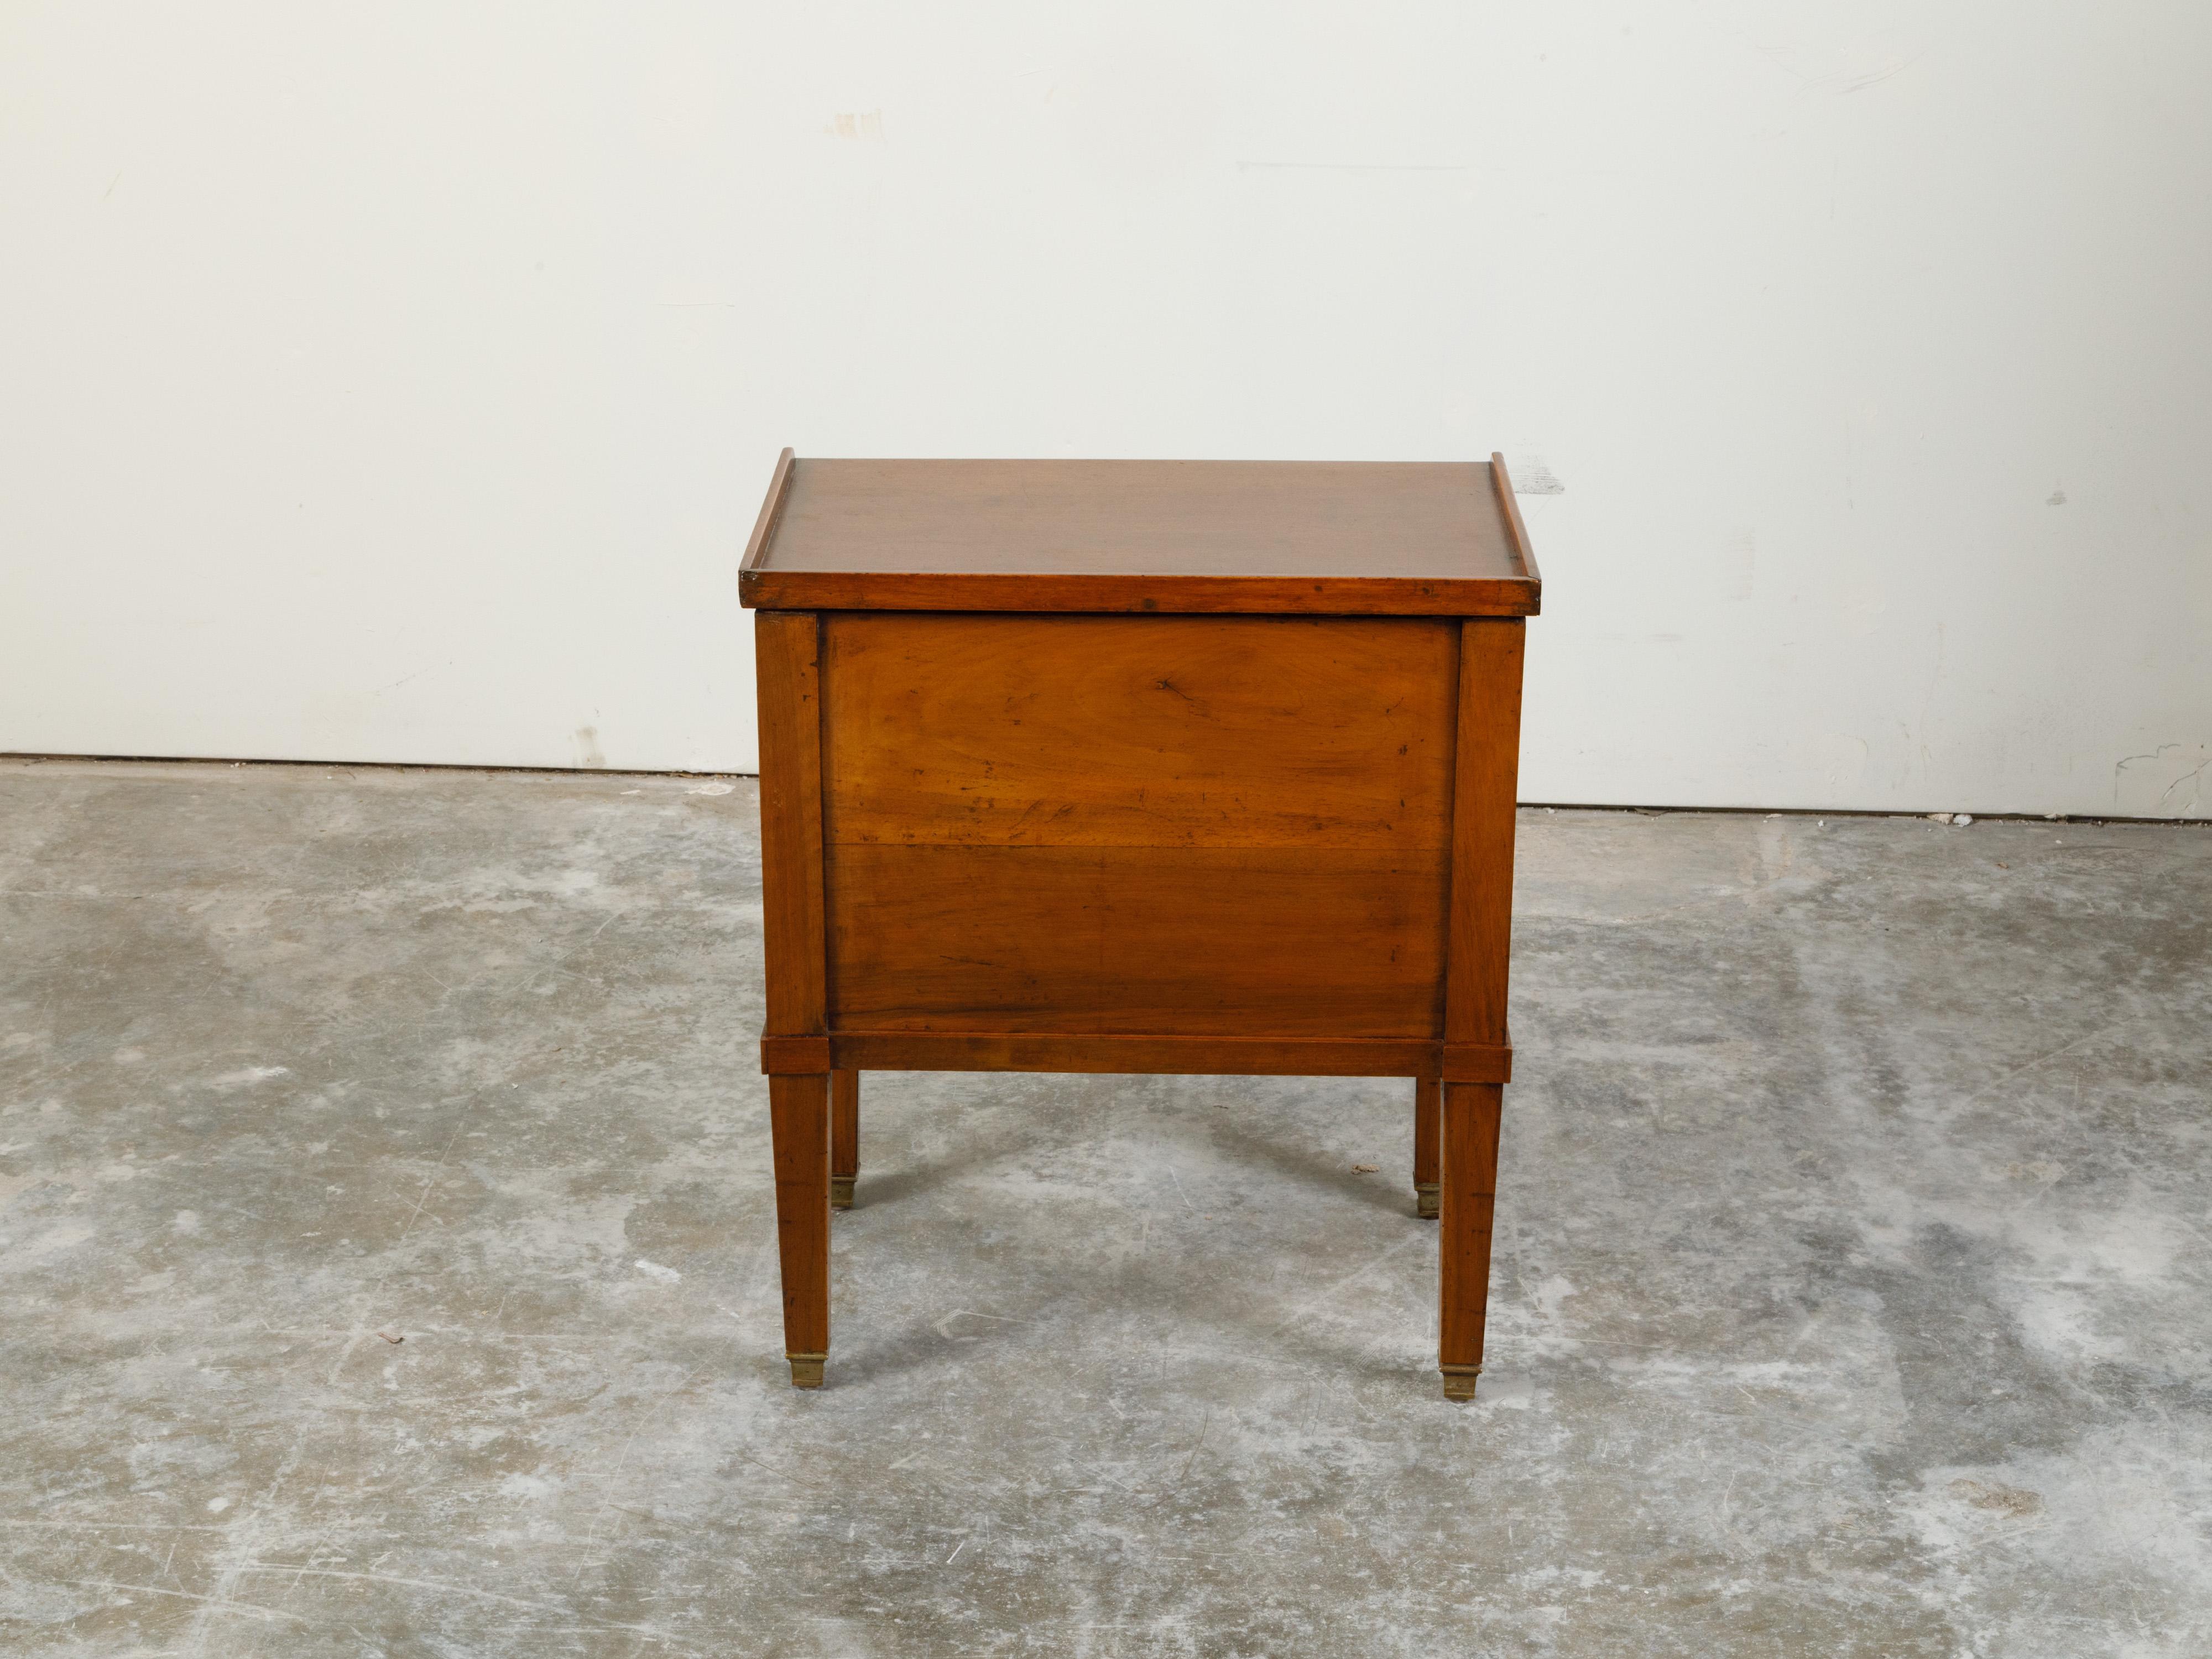 Brass Petite French 19th Century Walnut Bedside Table with Three Drawers and Gallery